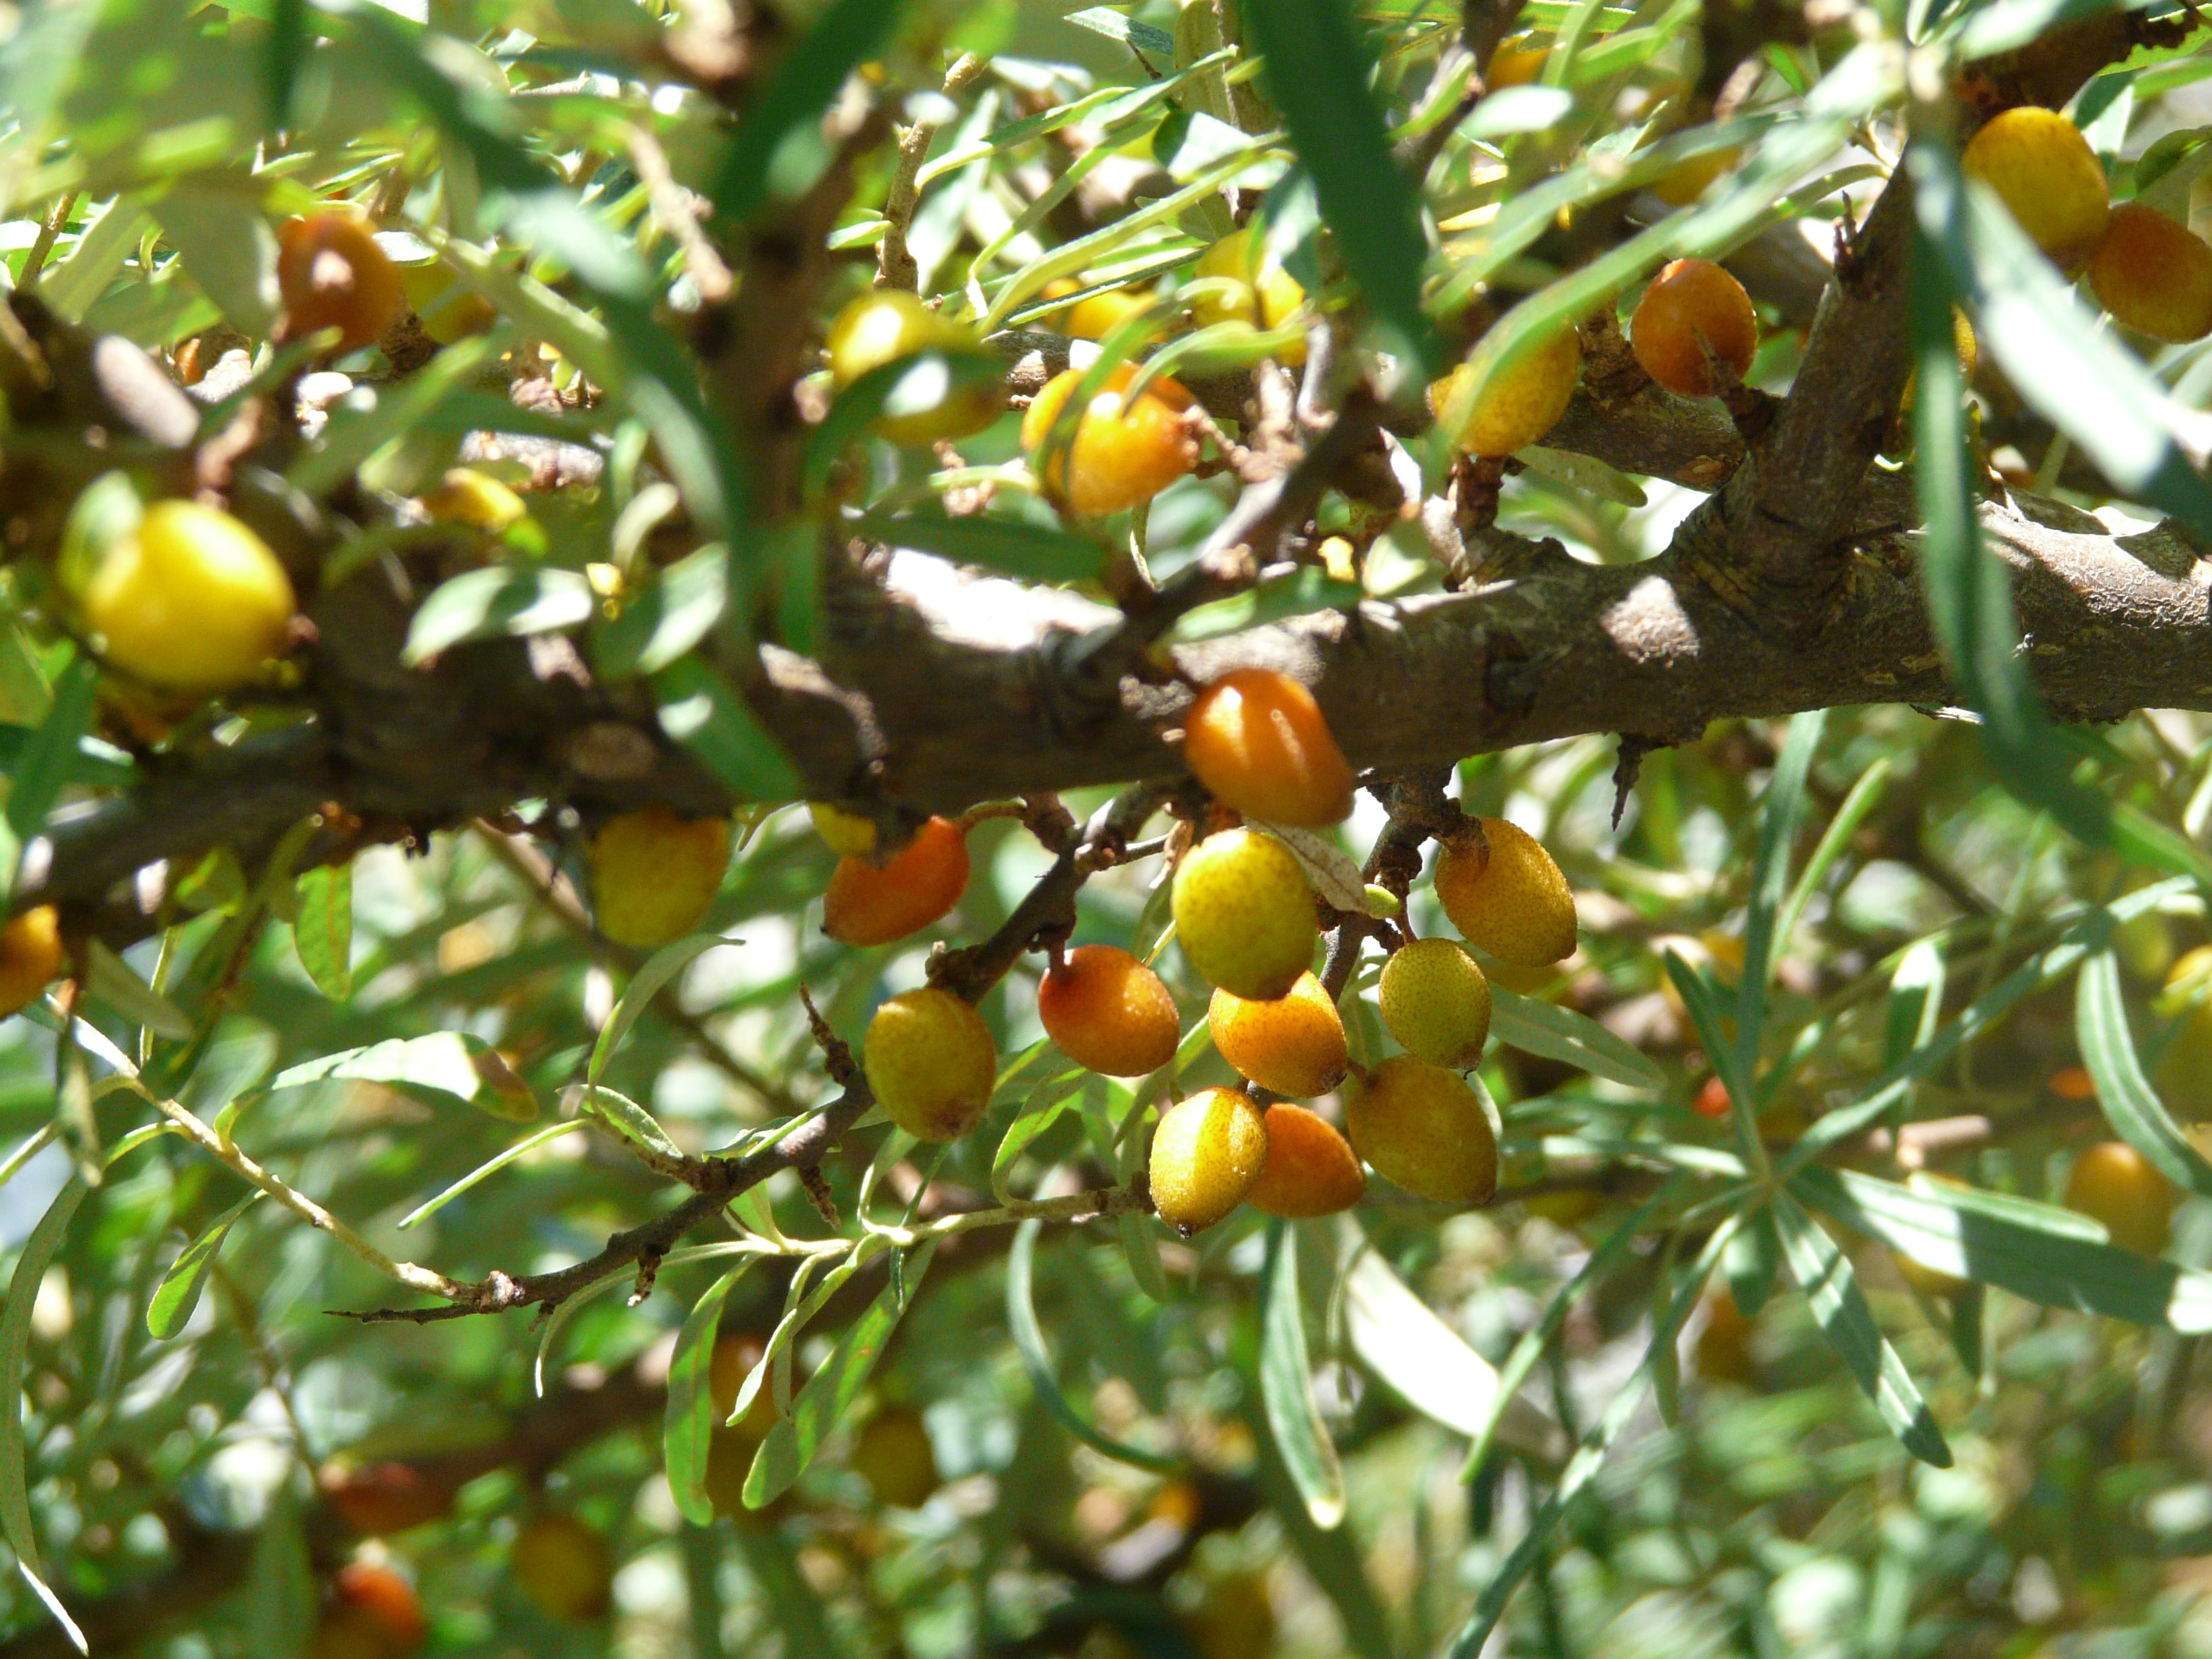 yellow and orange oval fruits